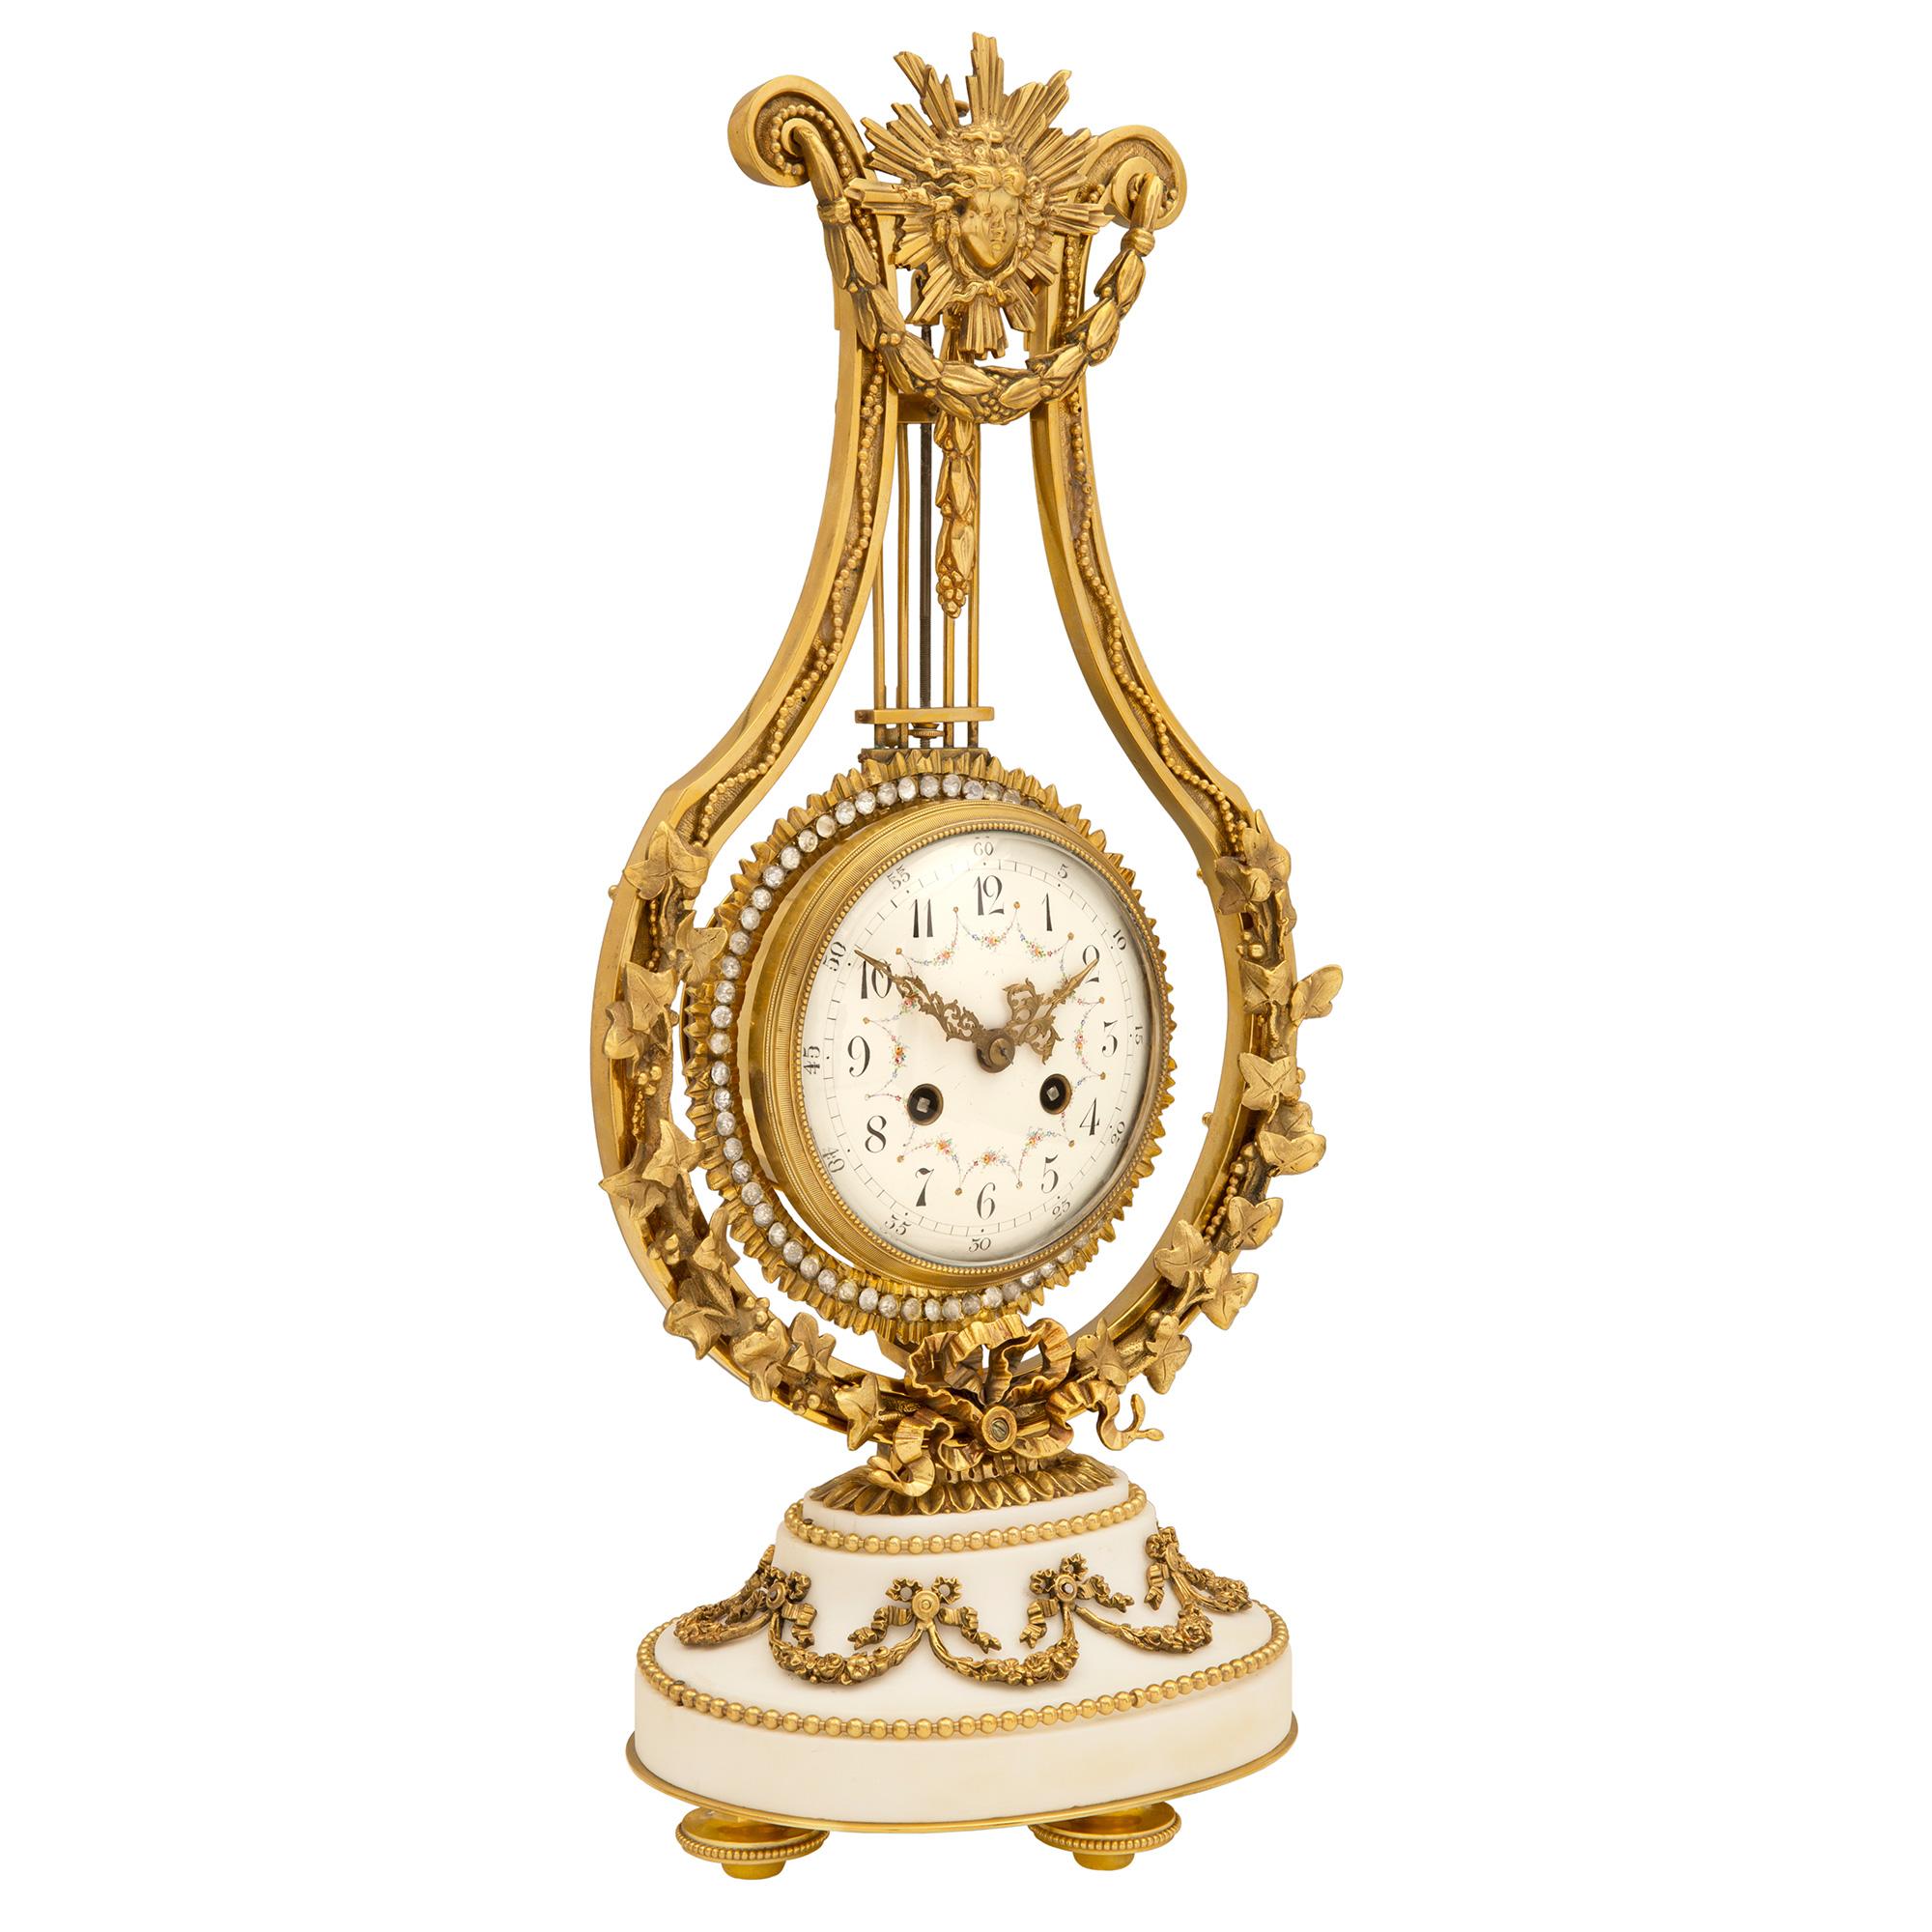 A most exquisite French mid-19th century Louis XVI st. ormolu, white Carrara marble and crystal clock. The clock is raised on a moulded oval white Carrara marble base supported by richly chased beaded topie shaped feet. Above and below the wrap